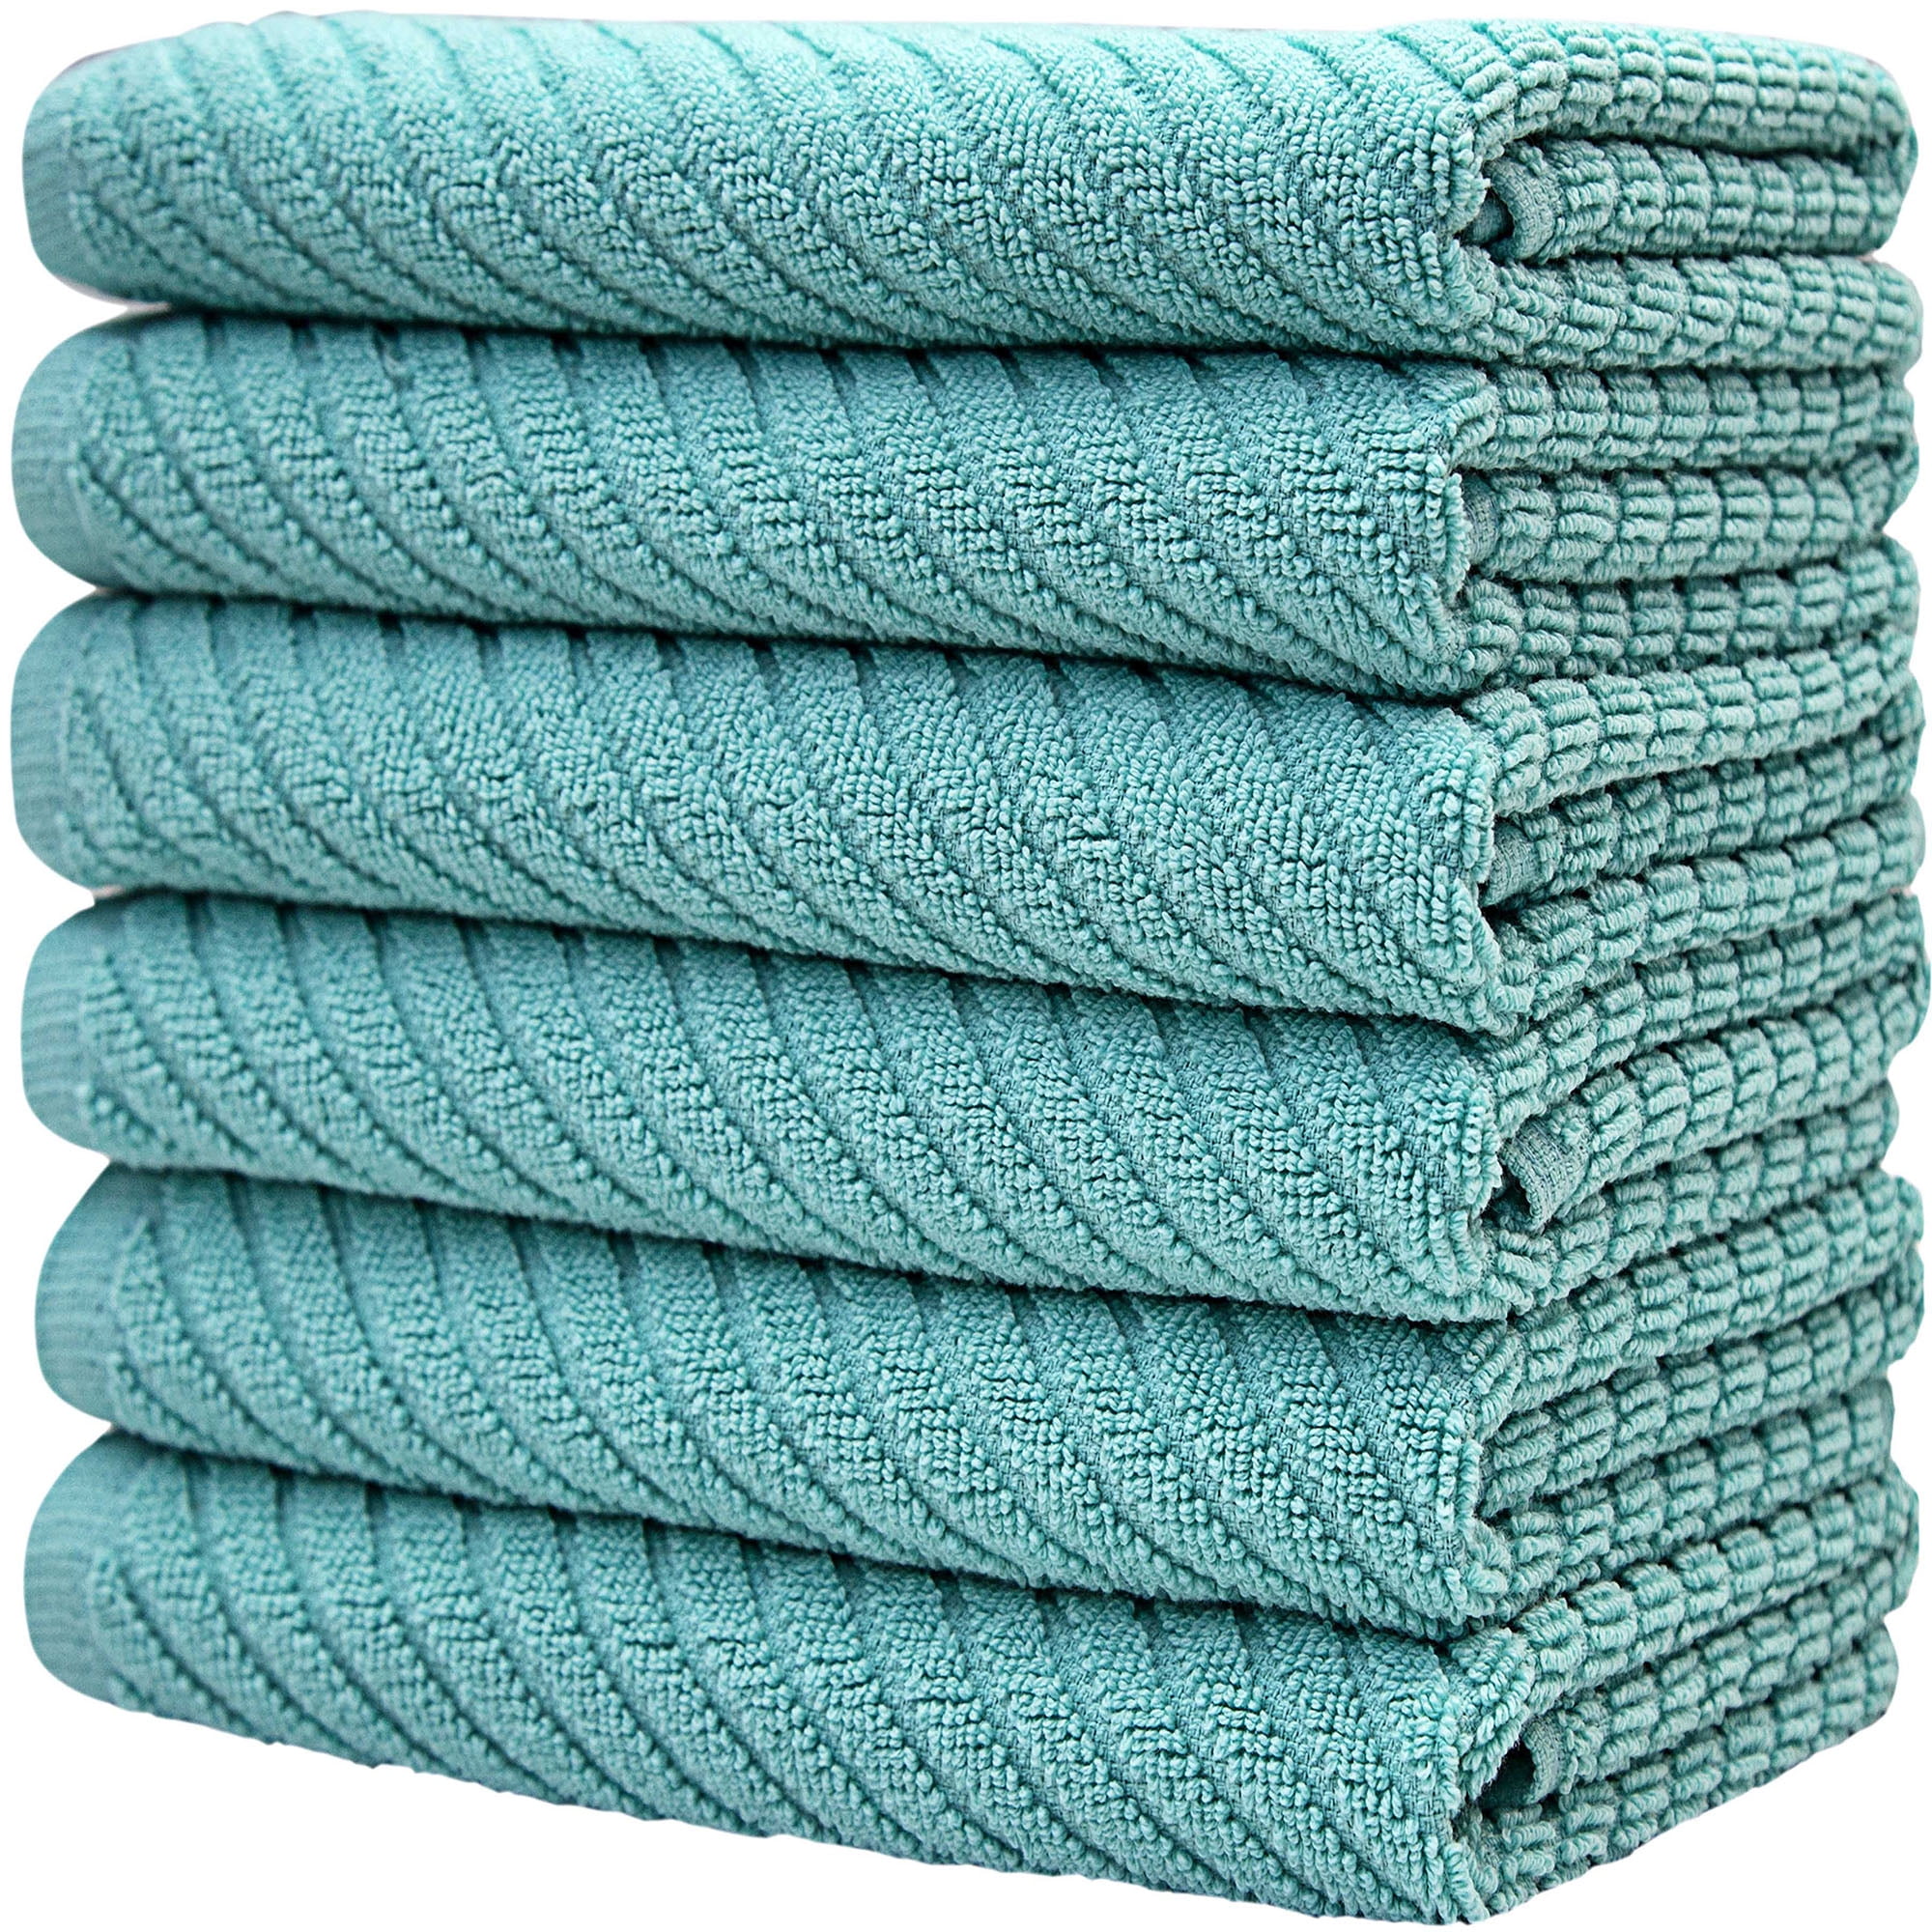 Bumble Premium Large Cotton Kitchen Towels, 16”x 28”, 6 Pack, Weft  Insert Design, 380 GSM Highly Absorbent Hand Towels Set With Hanging Loop